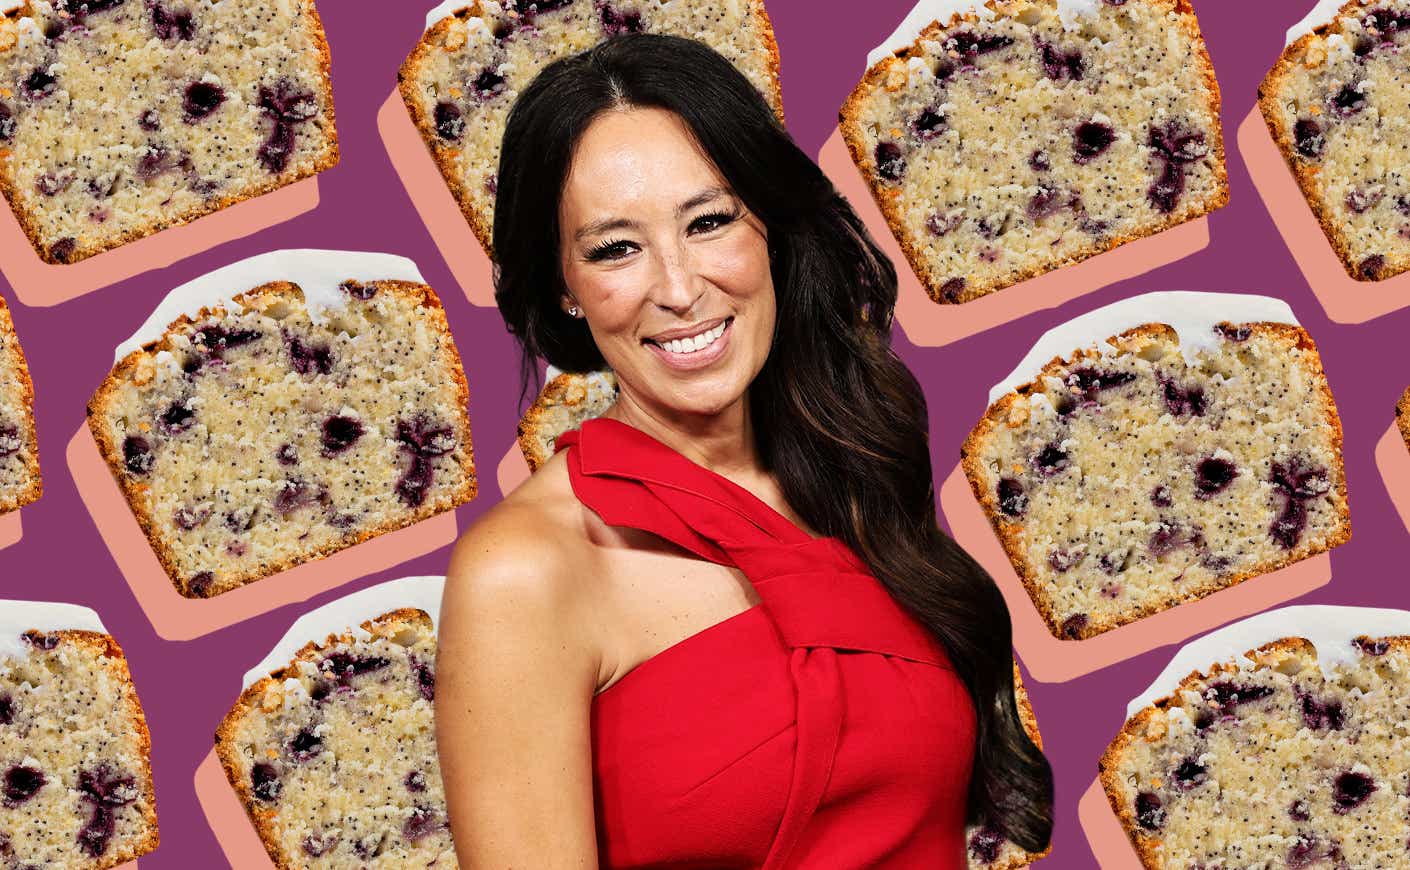 Joanna Gaines’ Blueberry Bread Recipe Gets Its Zest From a Pop of Lemon